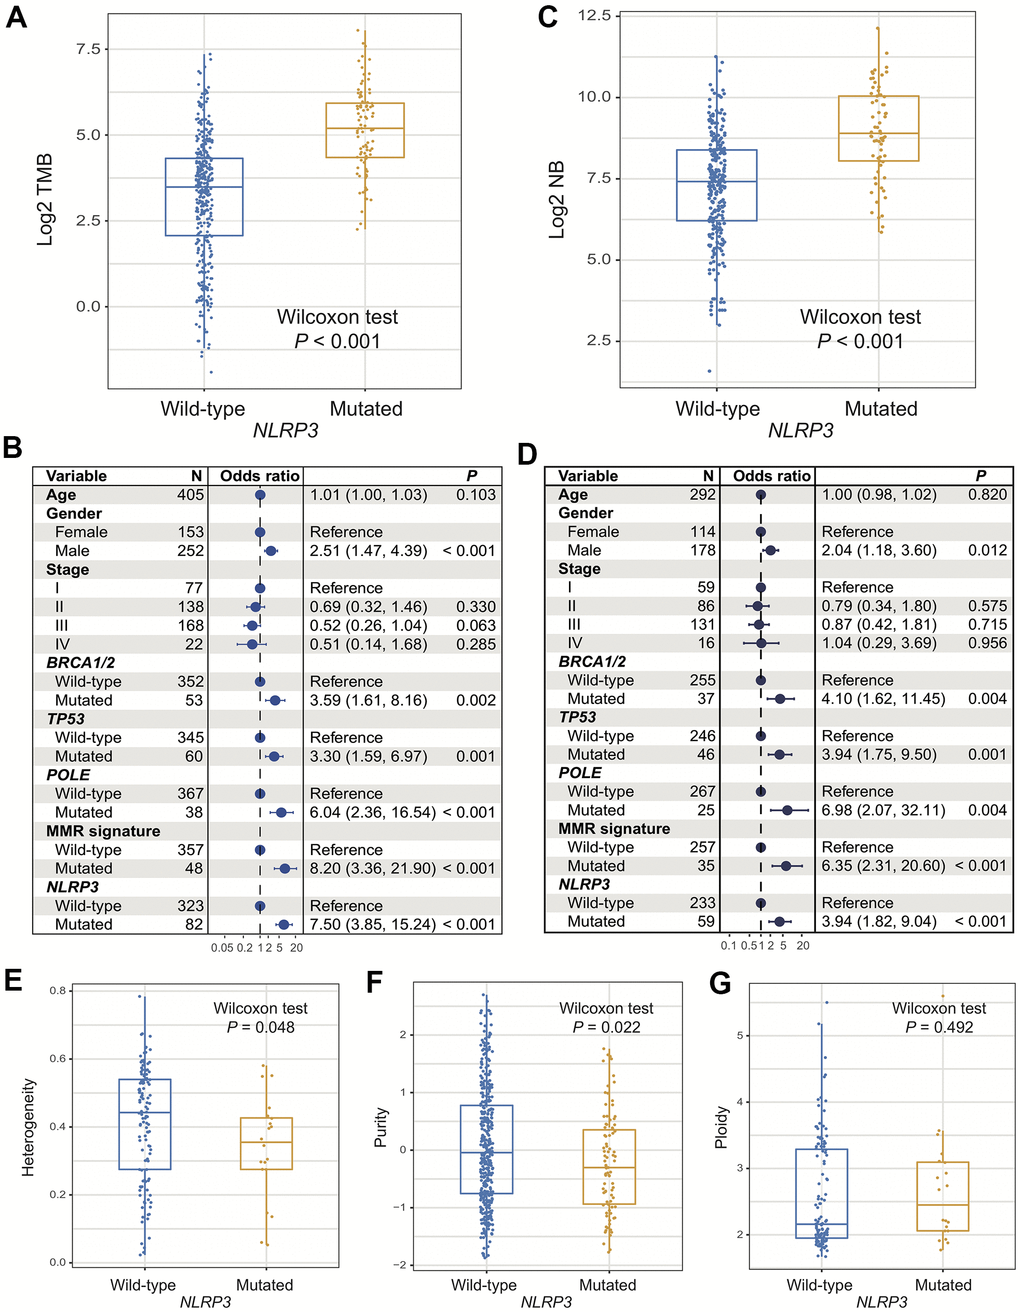 Association of NLRP3 mutations with TMB, NB, and genomic features. (A, B) NLRP3 mutations versus TMB with univariate analysis and multivariate regression model. (C, D) NLRP3 mutations versus NB with univariate analysis and multivariate regression model. NLRP3 mutations association with (E) tumor heterogeneity, (F) purity, and (G) ploidy.